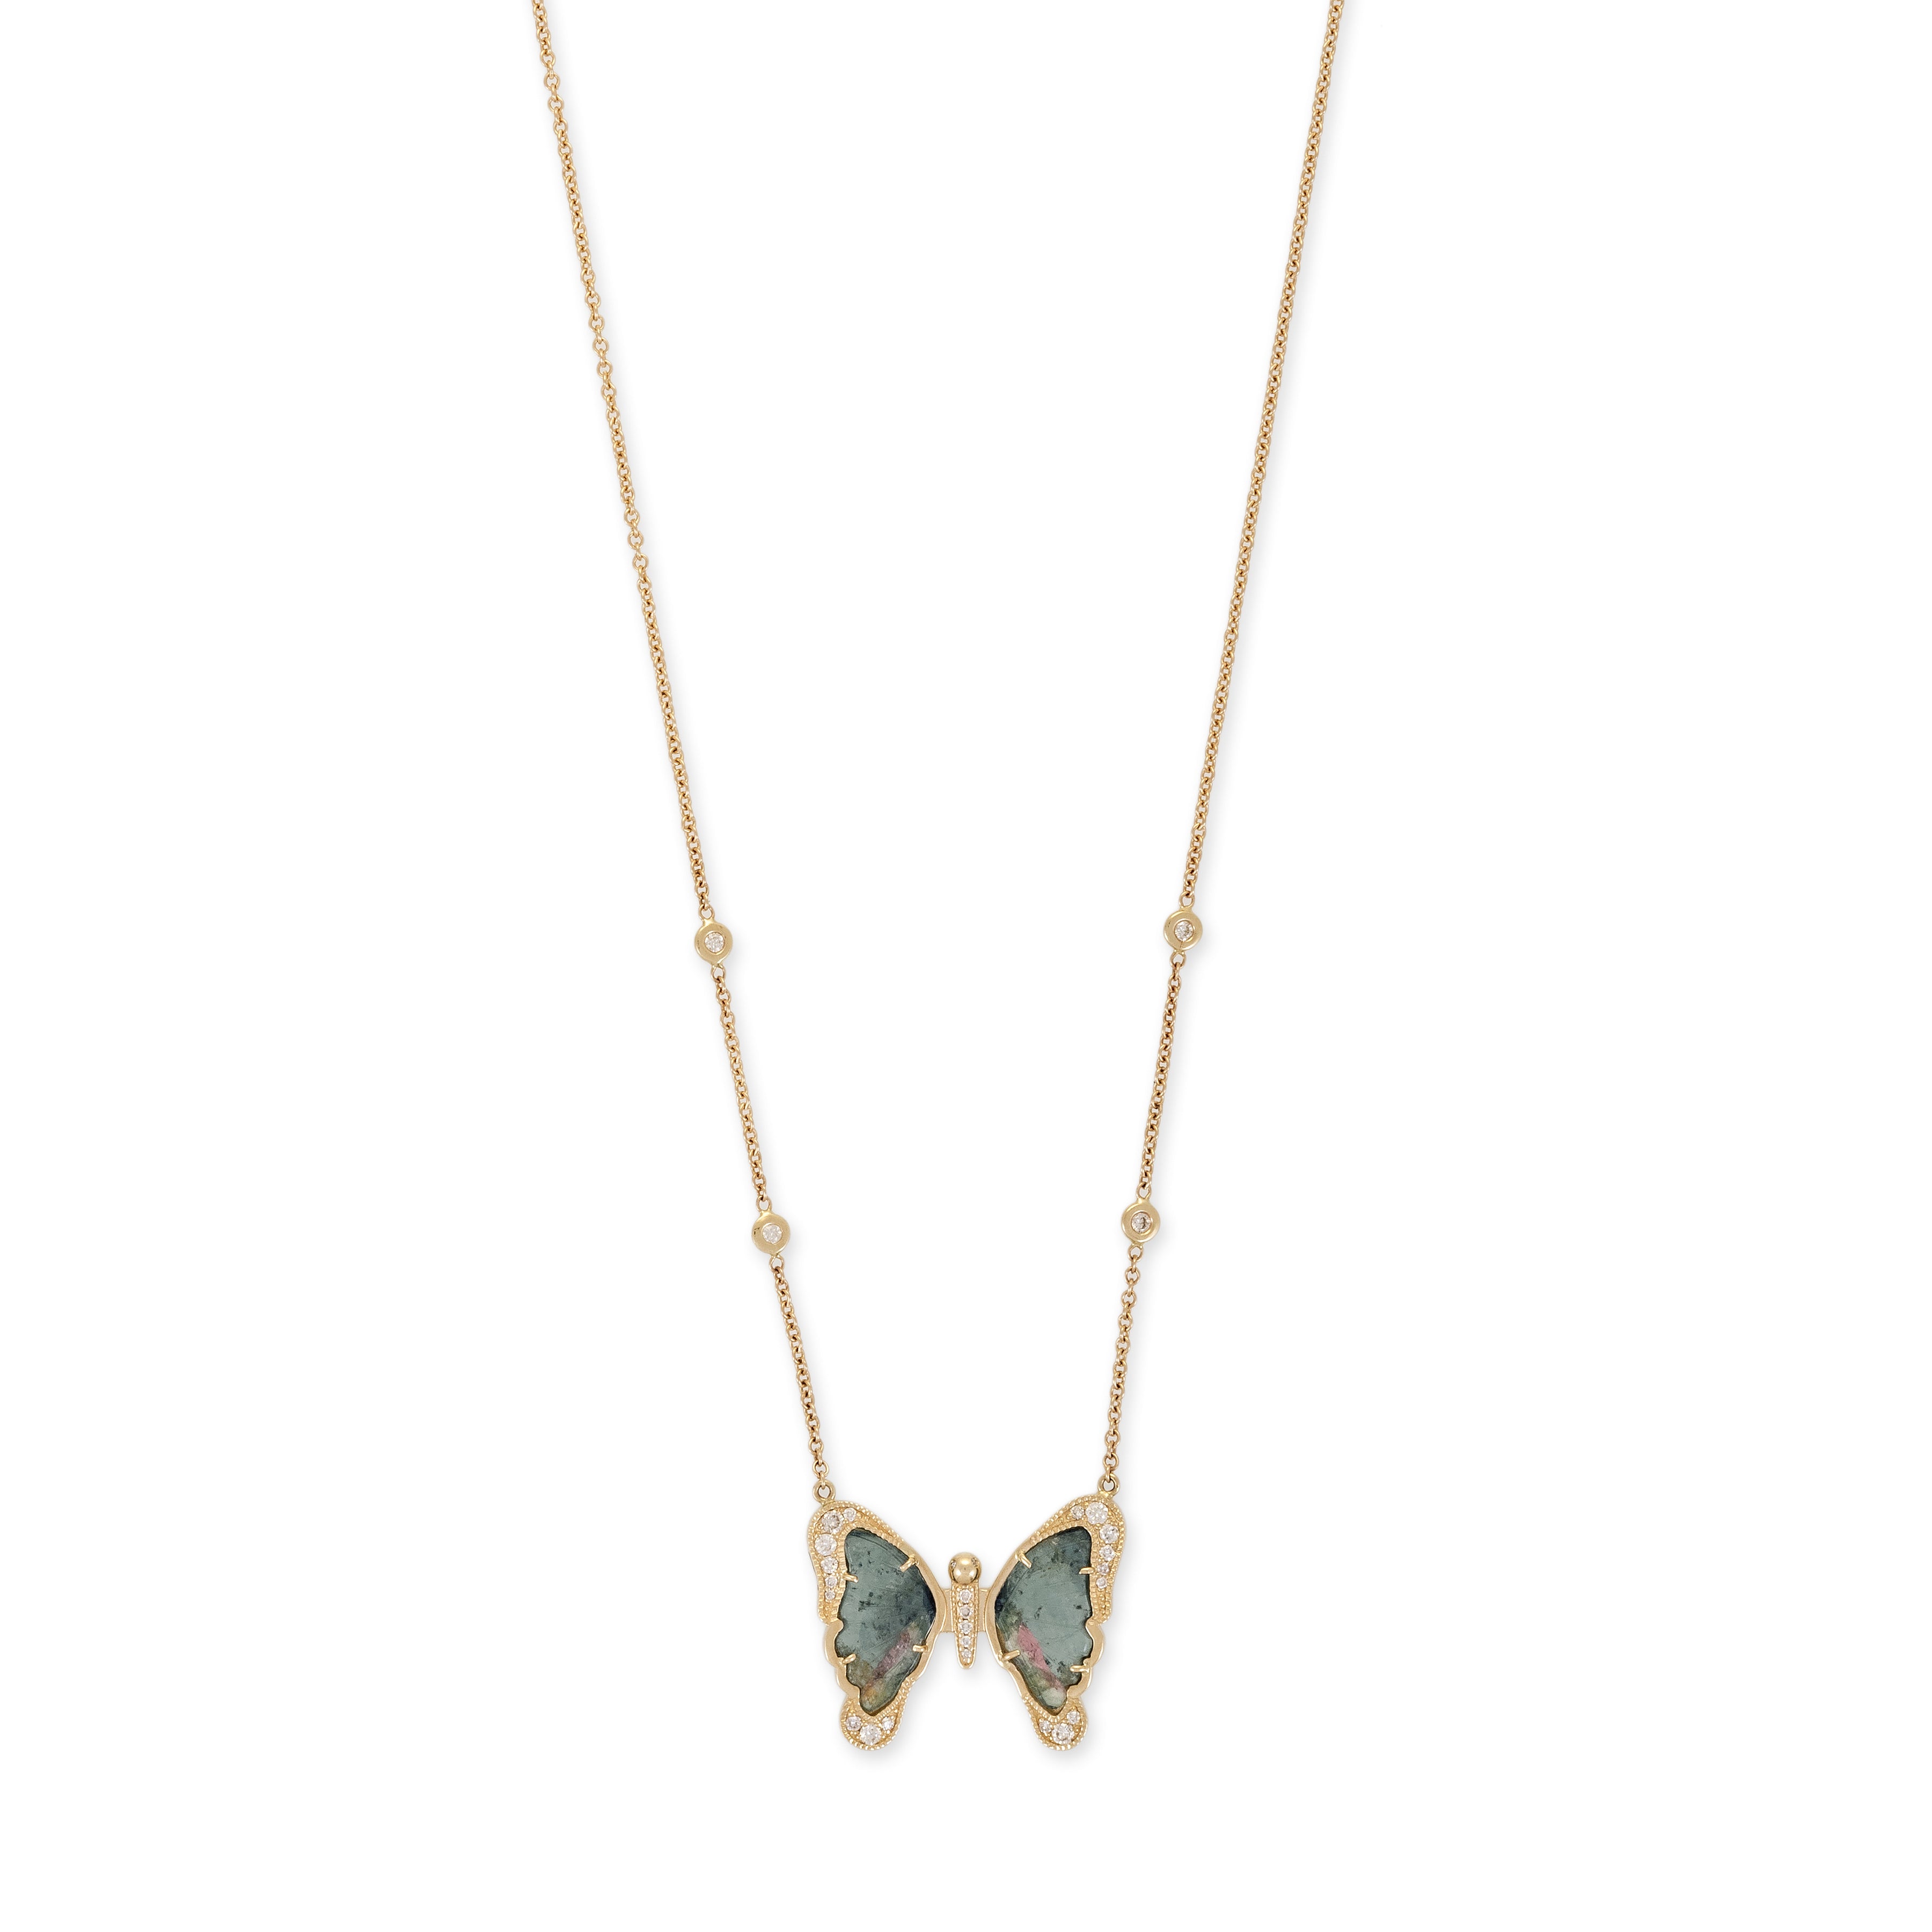 PARTIAL PAVE BORDER SMALL BLUE TOURMALINE PAVE CENTER BUTTERFLY NECKLACE